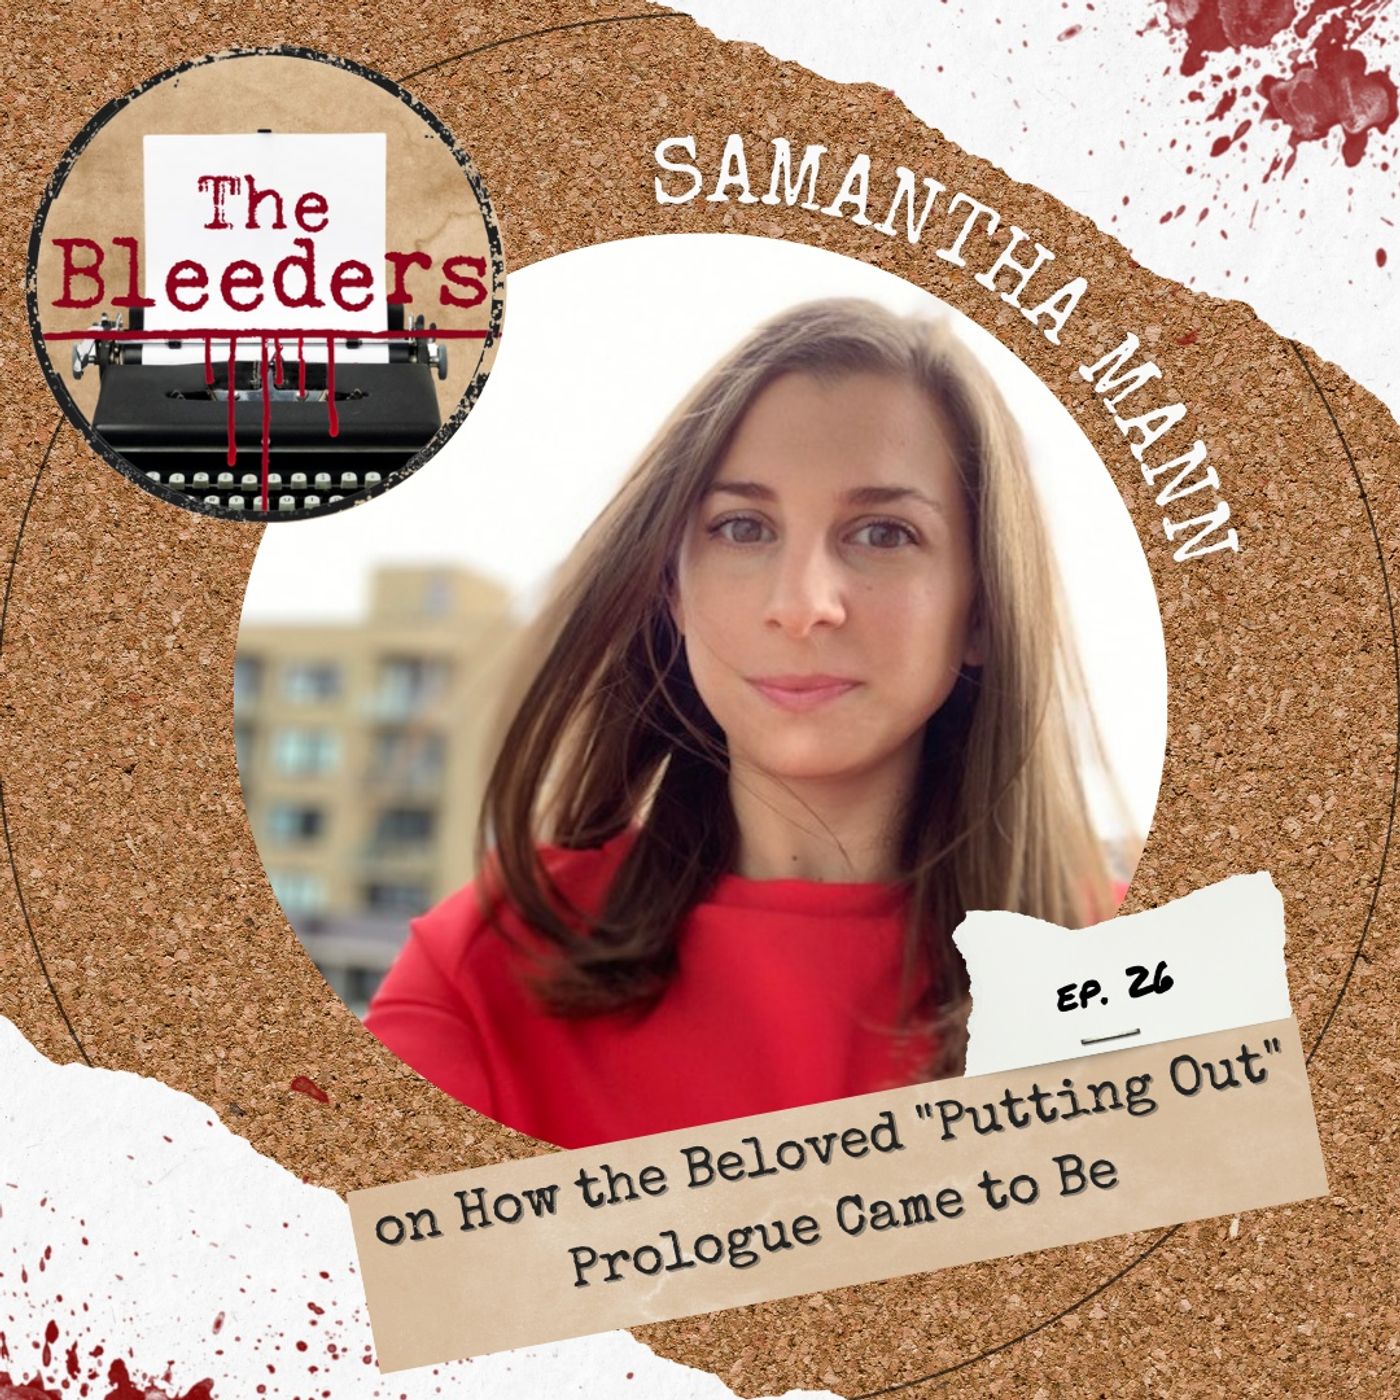 Samantha Mann on How the Beloved ”Putting Out” Prologue Came to Be